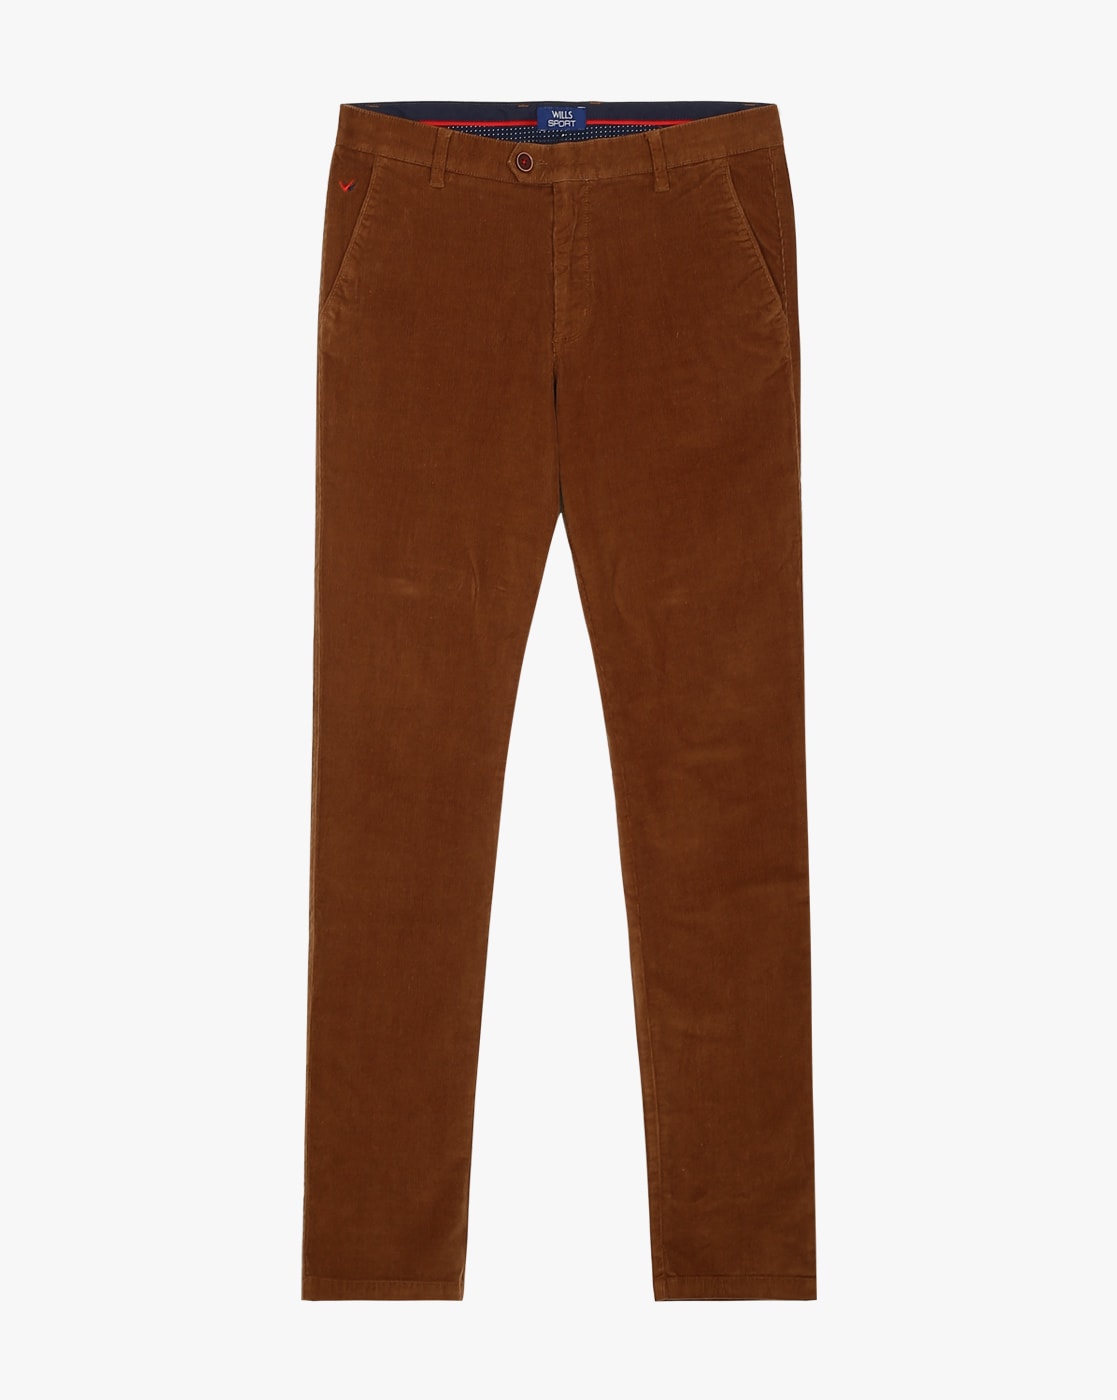 Buy Brown Trousers & Pants for Men by Wills Lifestyle Online | Ajio.com